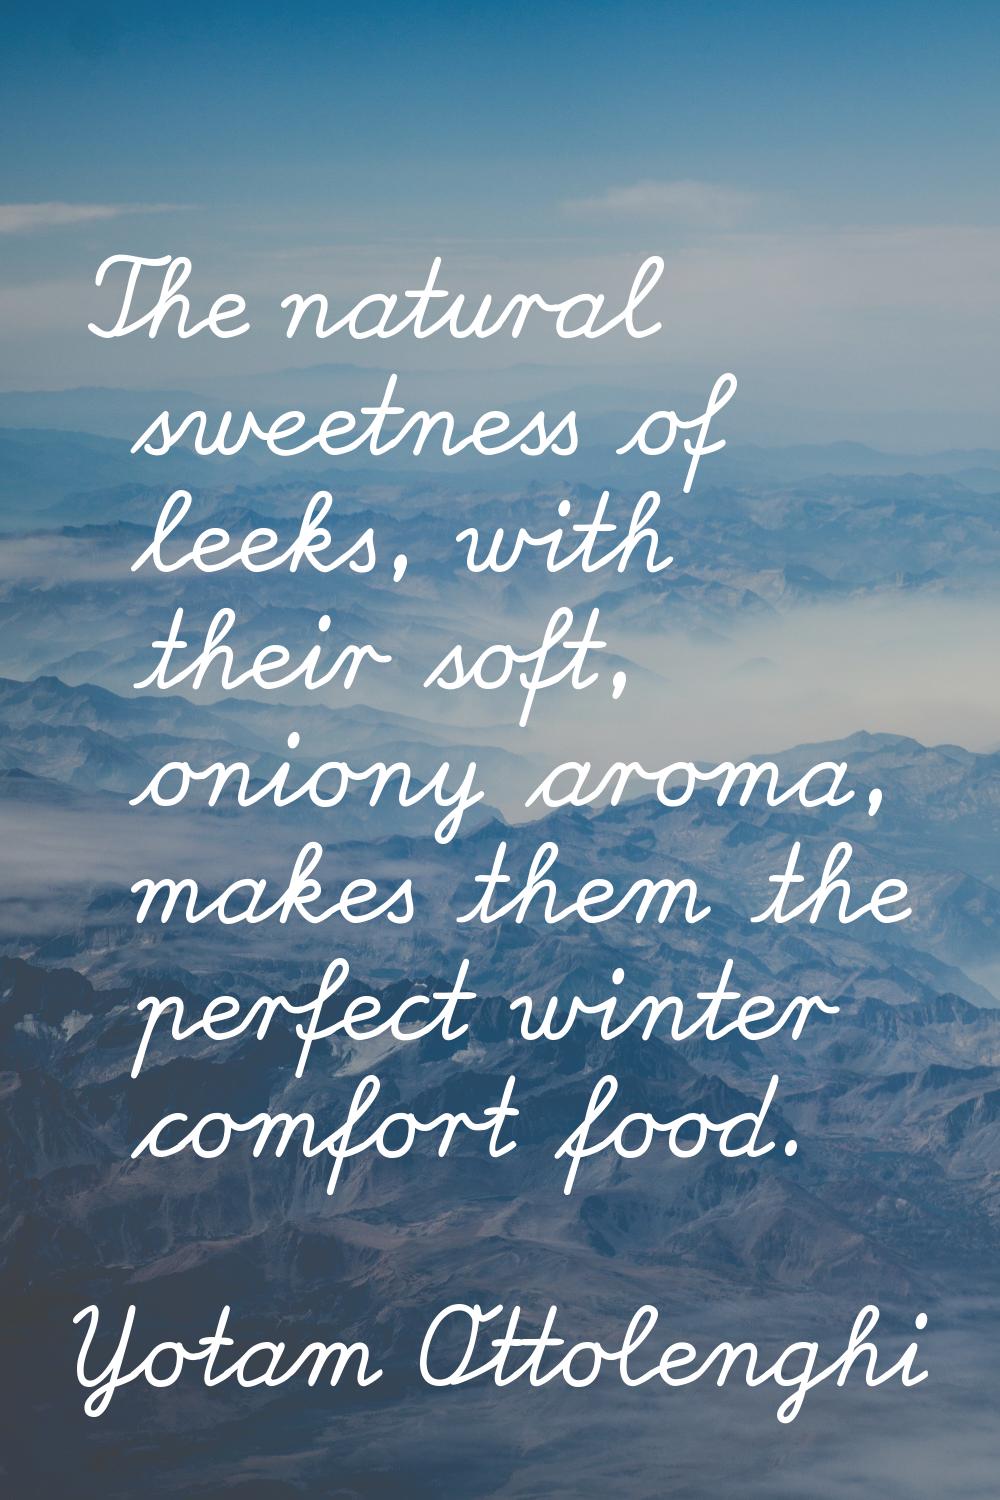 The natural sweetness of leeks, with their soft, oniony aroma, makes them the perfect winter comfor